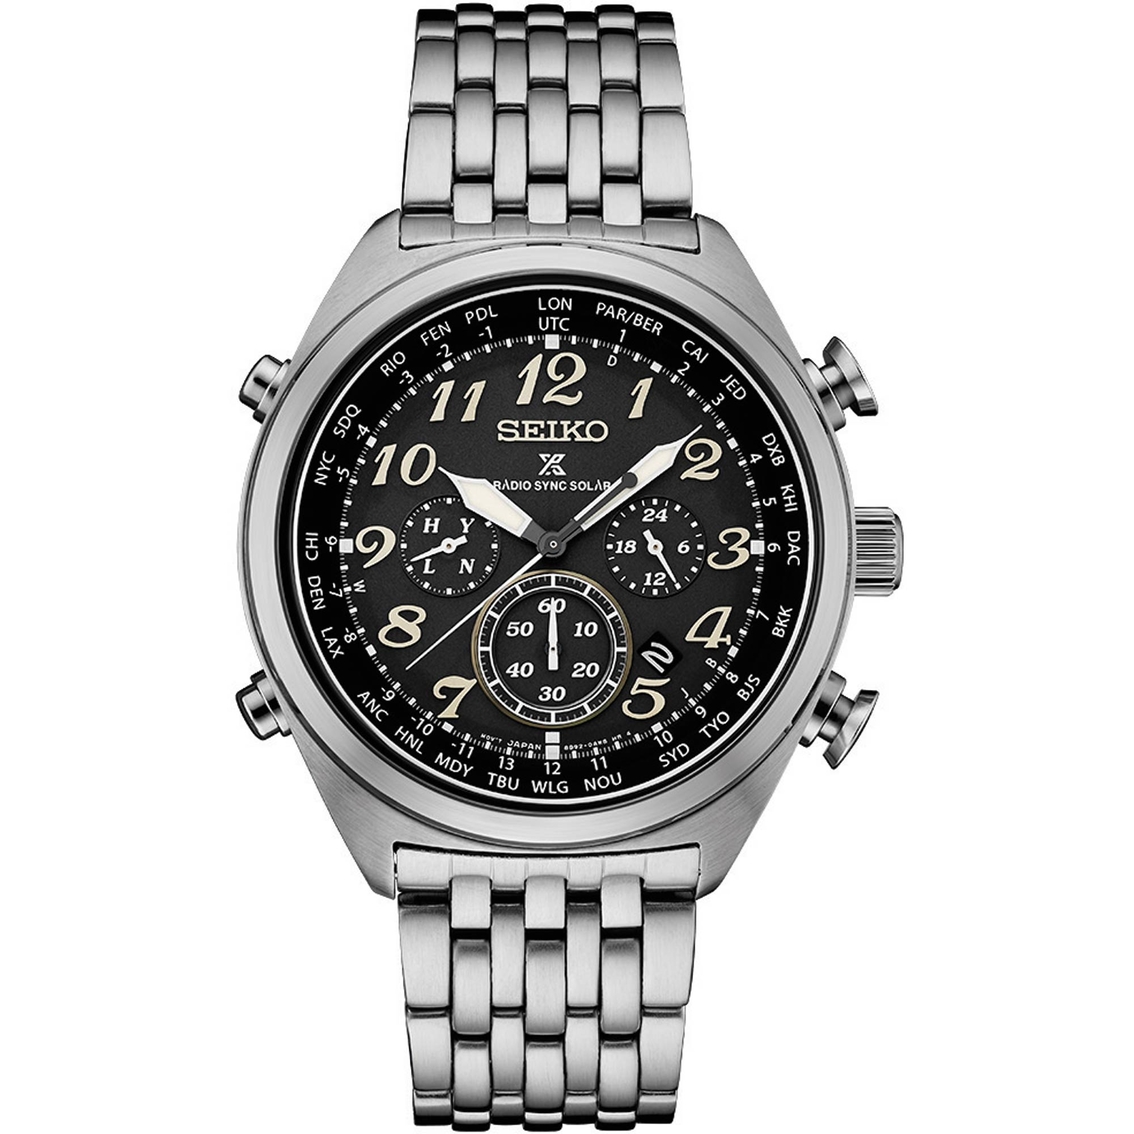 Seiko Men's Prospex Radio Sync Solar World Time Chronograph Ssg017 |  Stainless Steel Band | Jewelry & Watches | Shop The Exchange